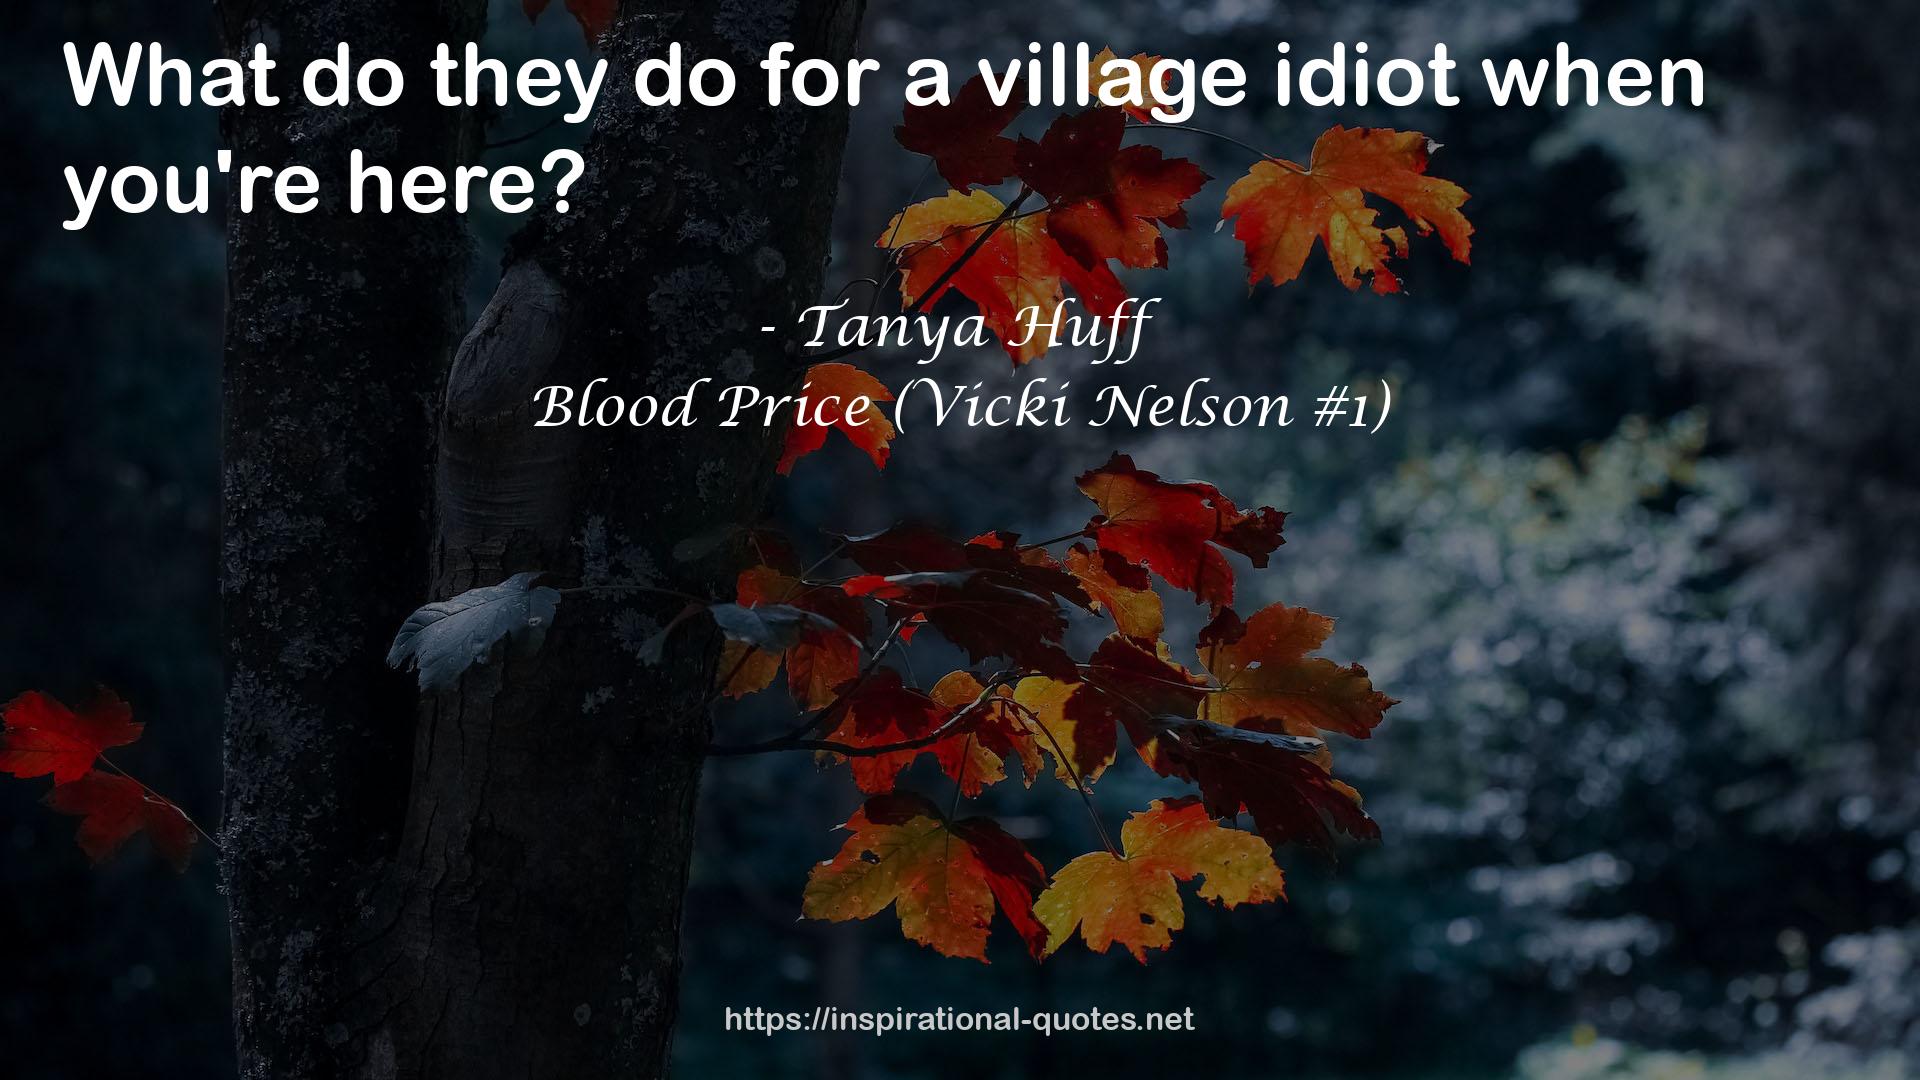 Blood Price (Vicki Nelson #1) QUOTES